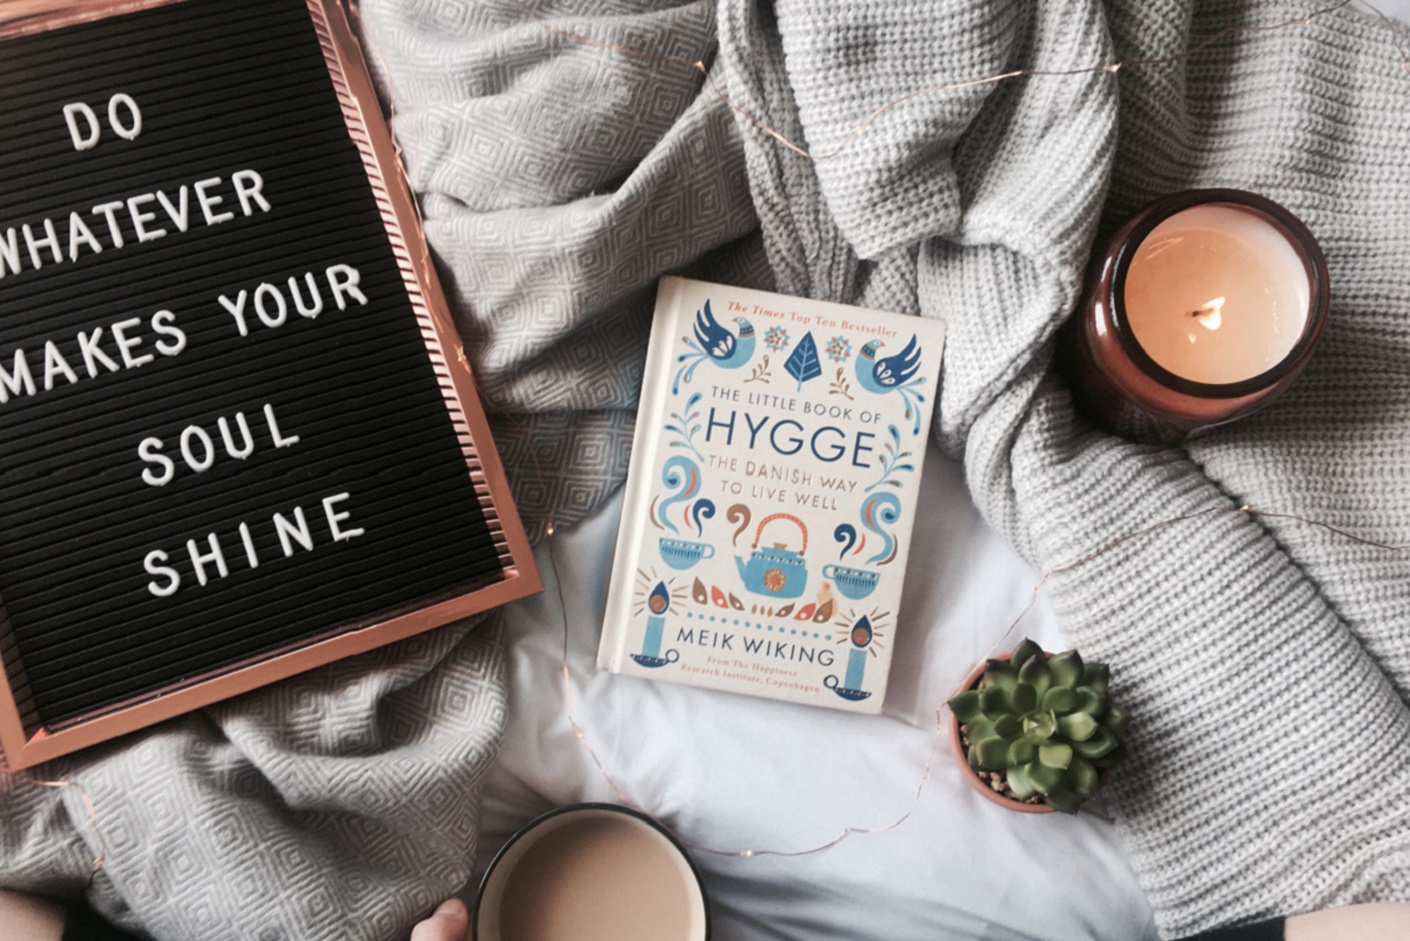 Hygge: An example of hospitality across cultures